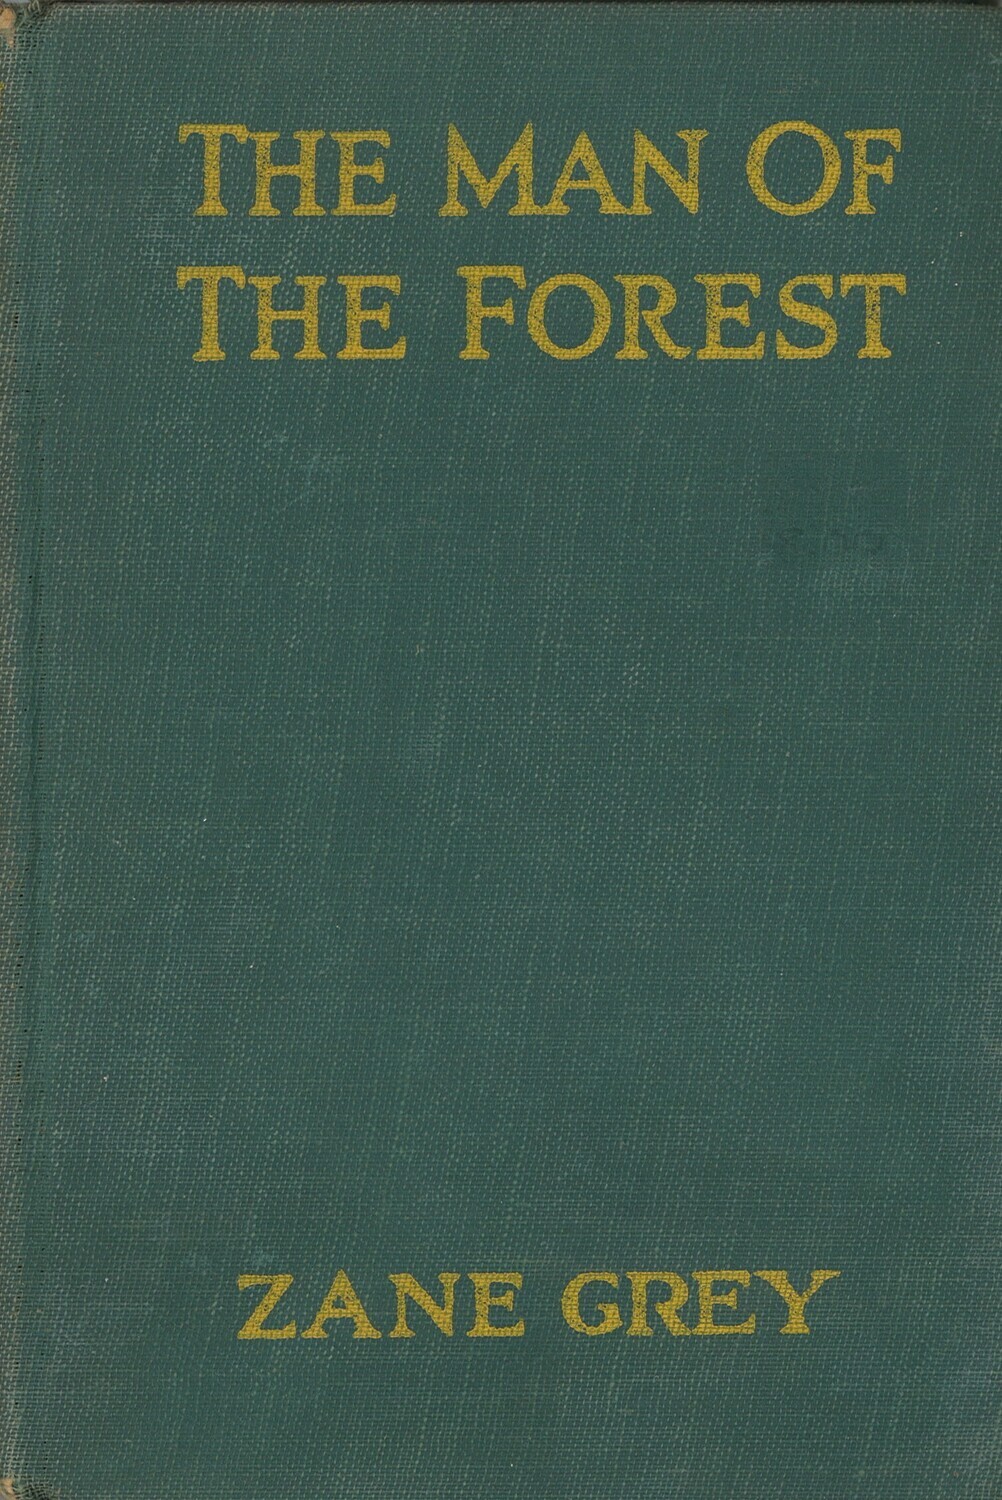 The Man of The Forest